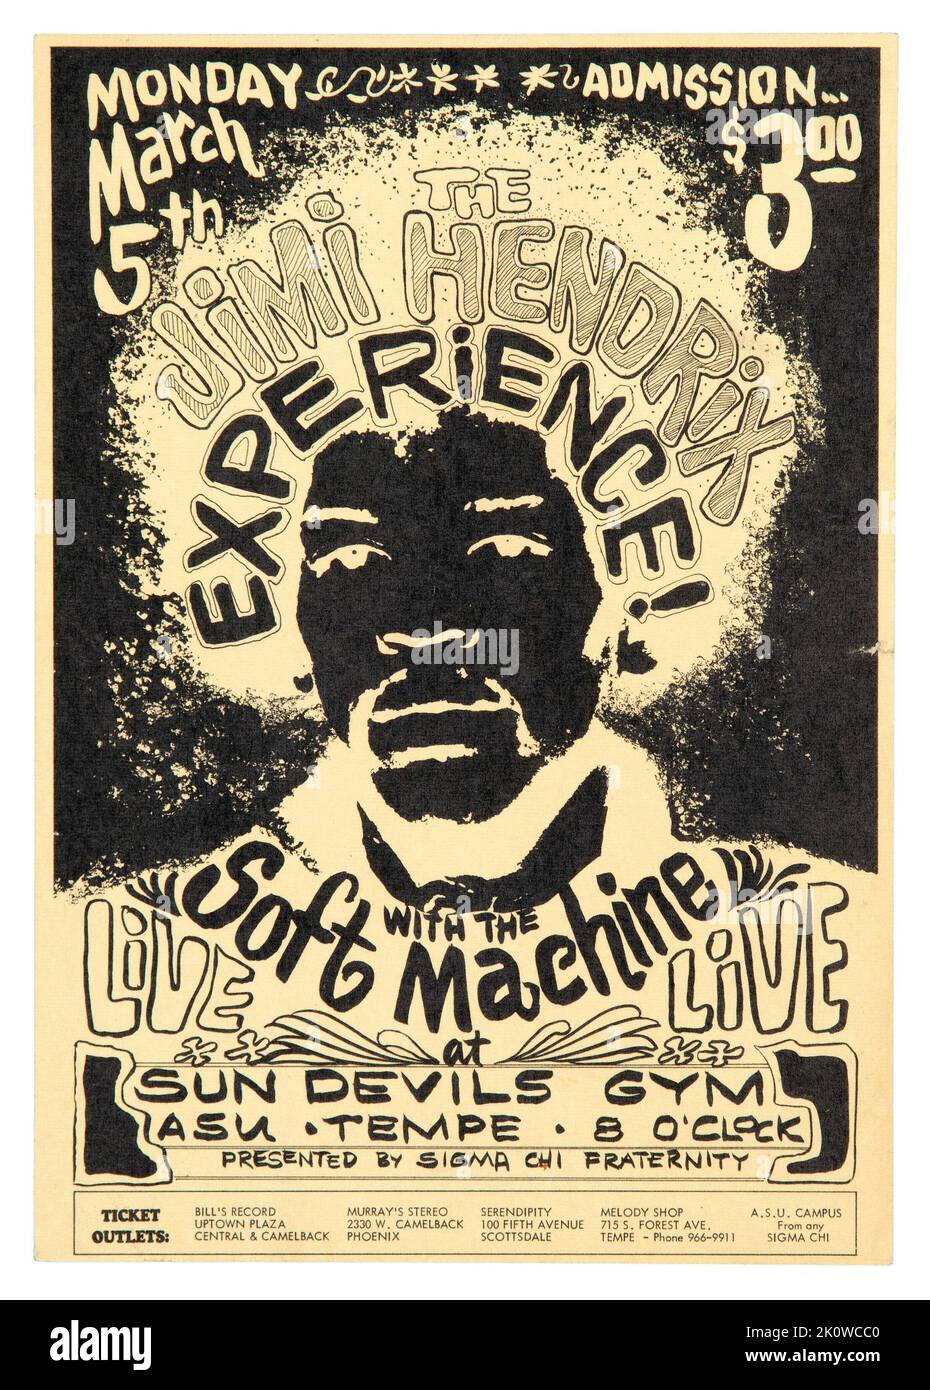 Jimi Hendrix Experience 1968 Tempe, Arizona Concert Handbill. A concert-advertising flyer for Jimi Hendrix and the Soft Machine performing at Arizona State University in early 1968. Stock Photo